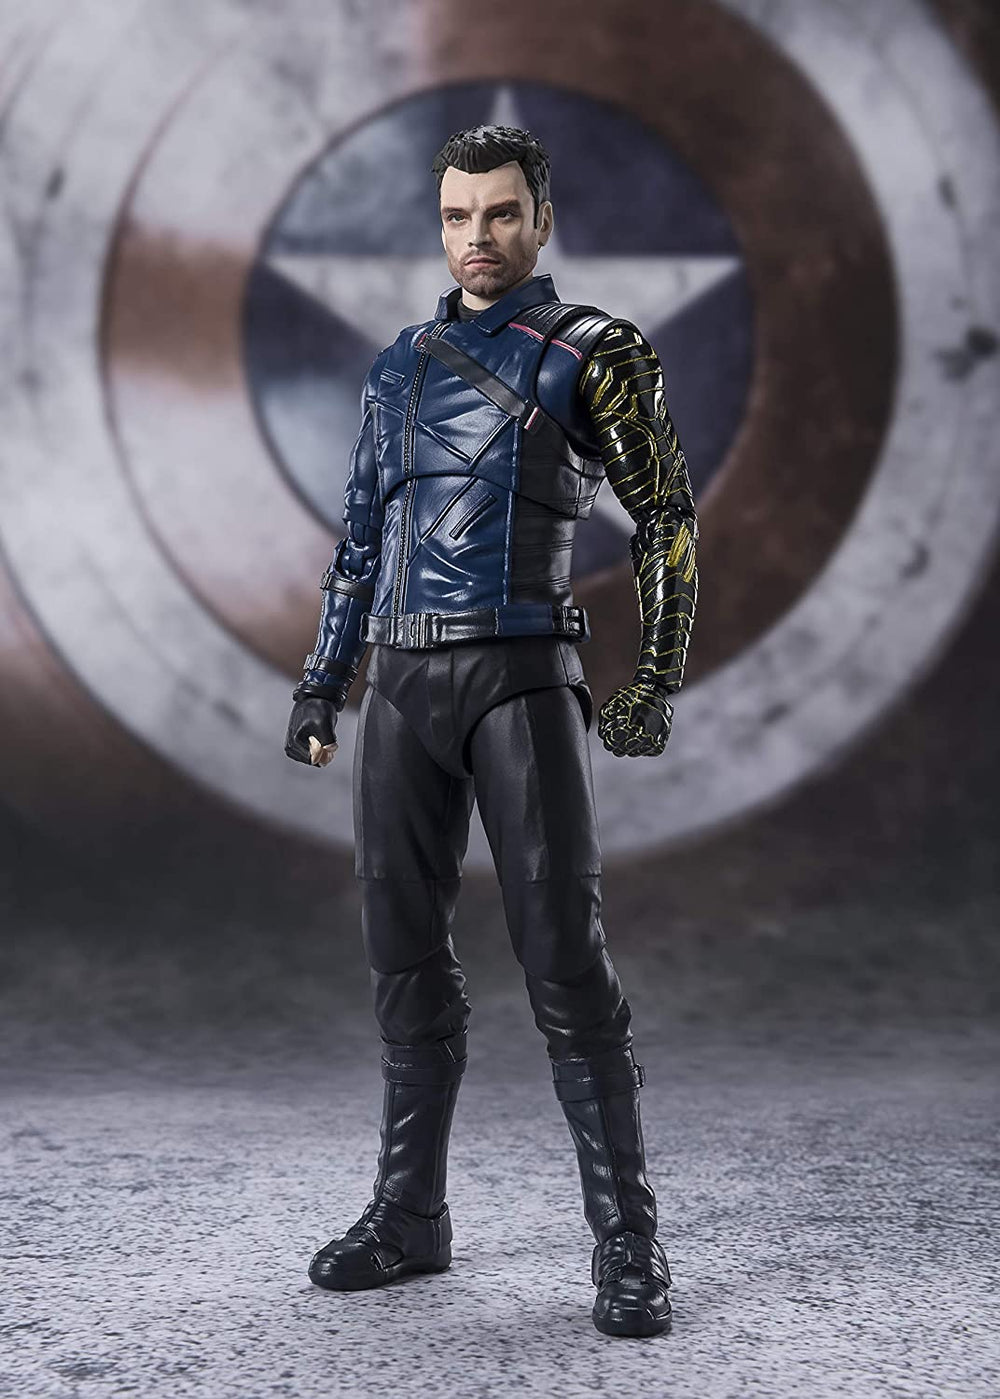 Tamashi Nations Falcon and The Winter Soldier Bucky Barnes S.H.Figuarts Figure